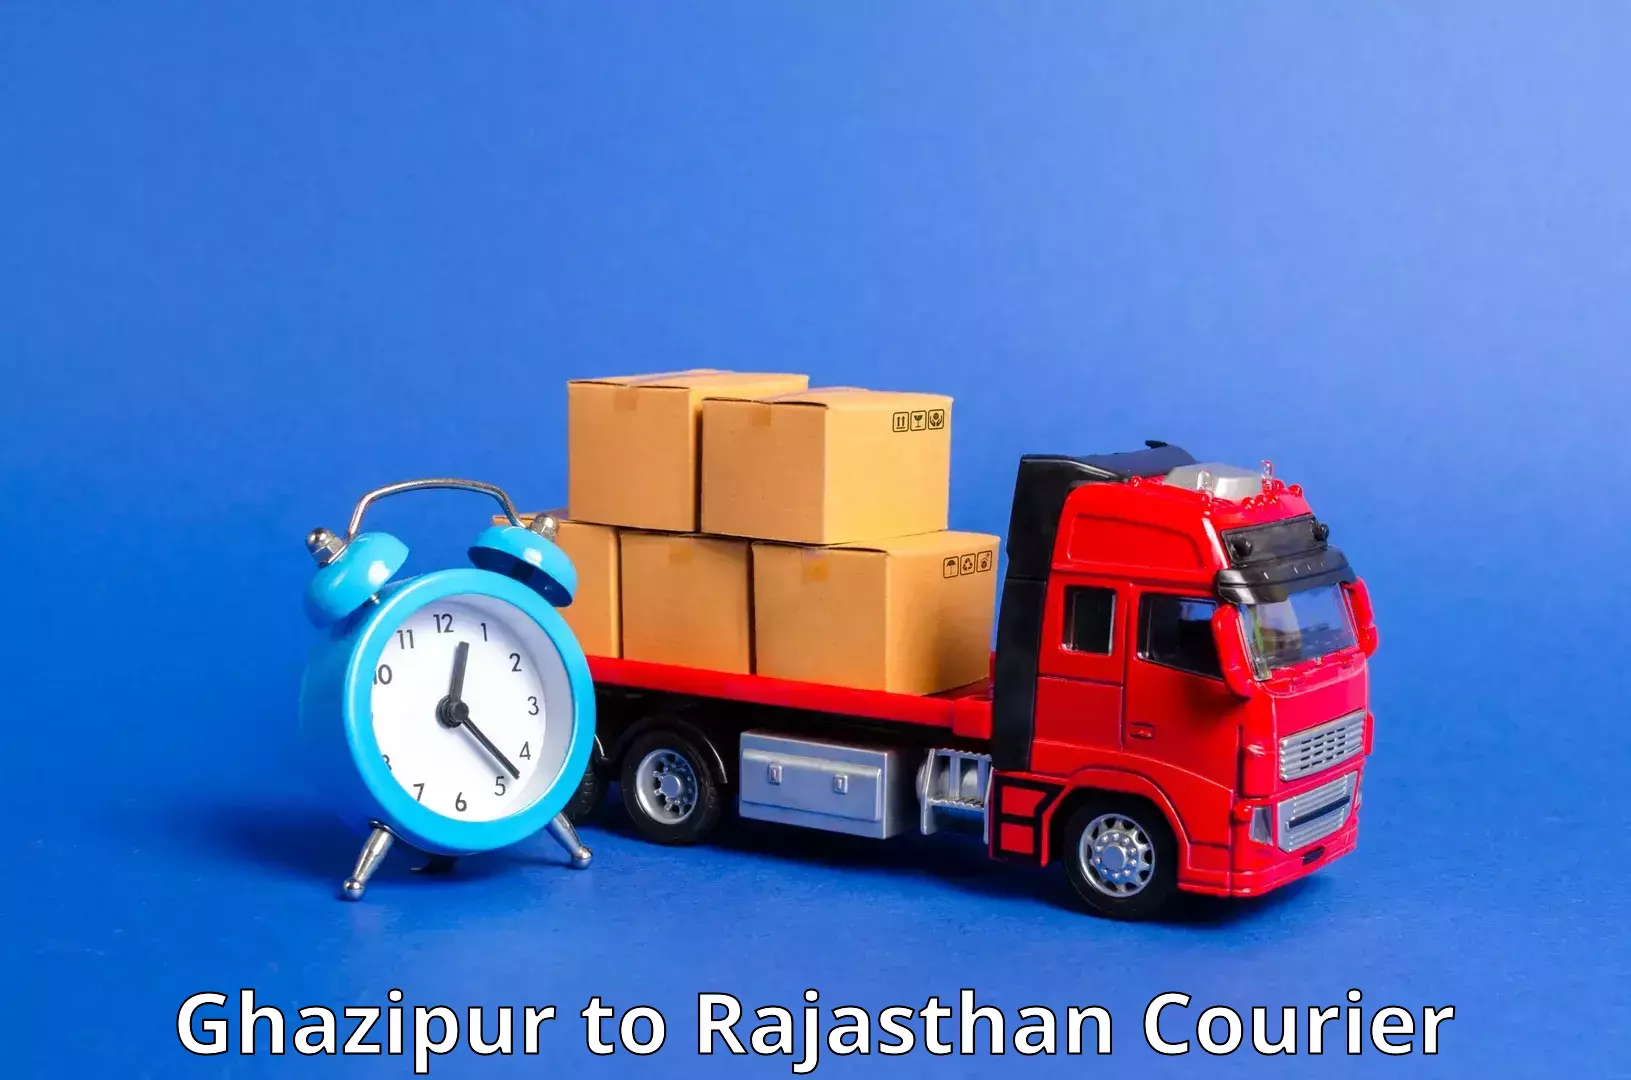 Express postal services Ghazipur to Ajmer